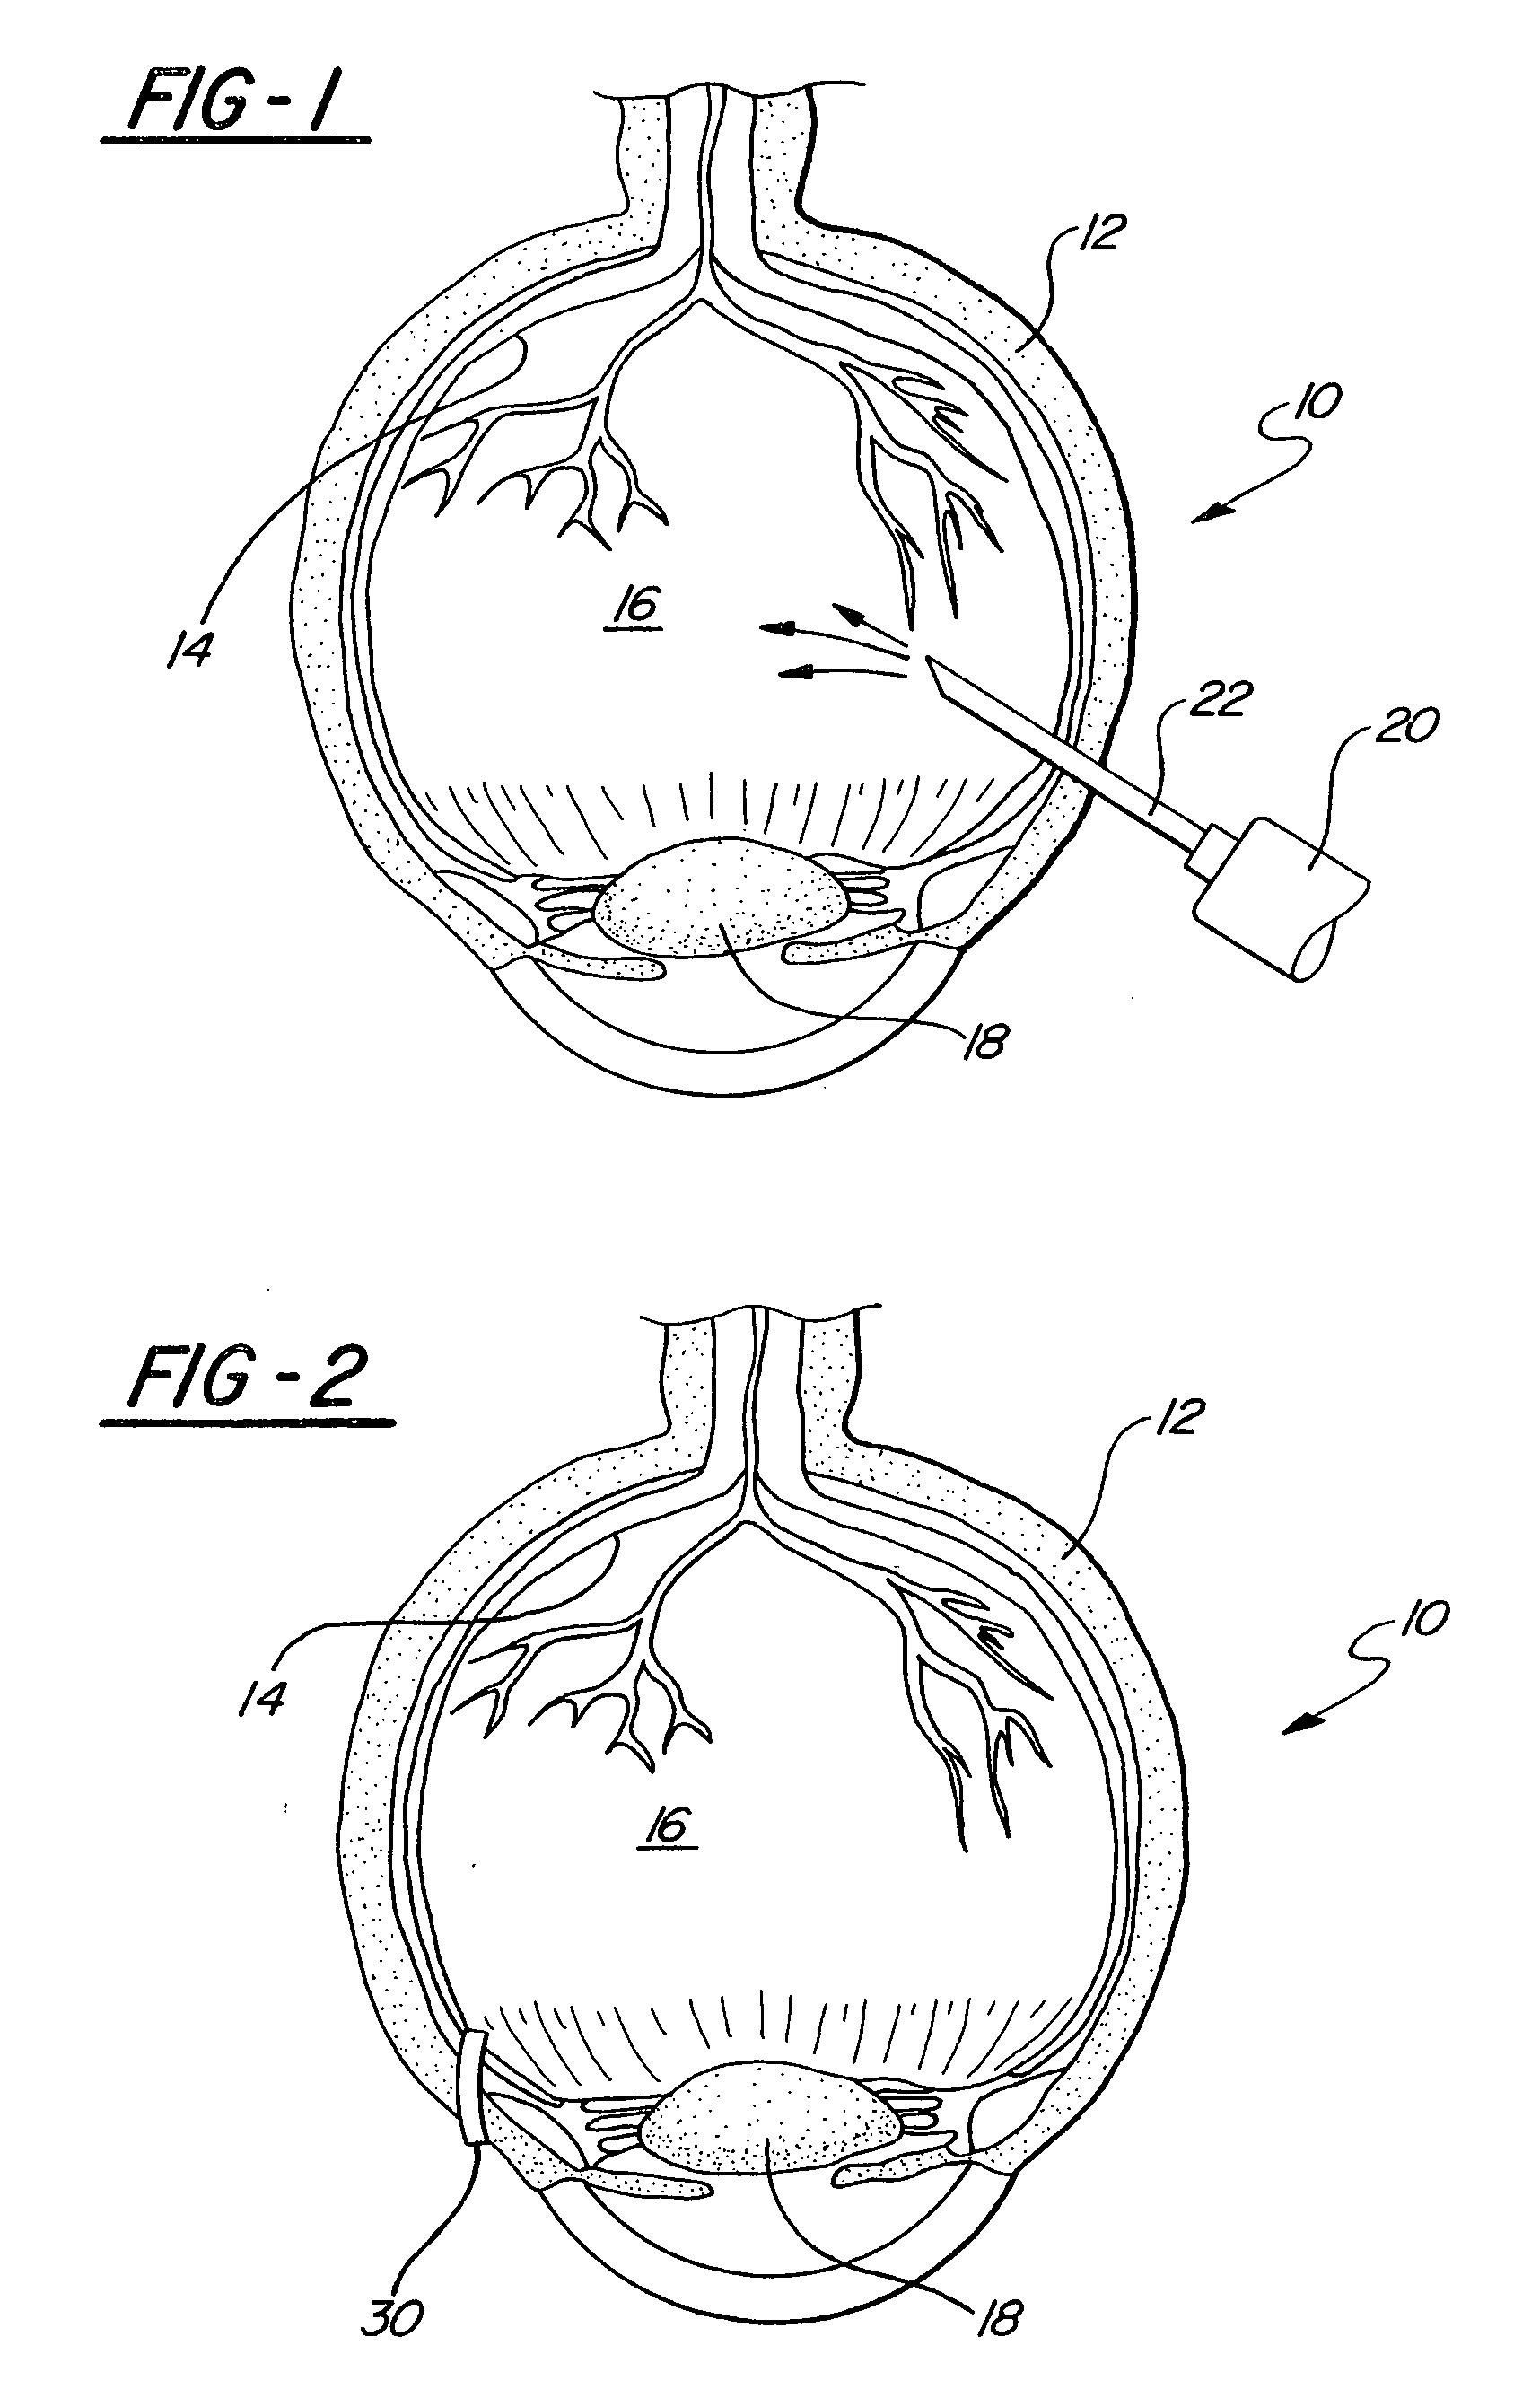 Method for creating a separation of posterior cortical vitreous from the retina of the eye